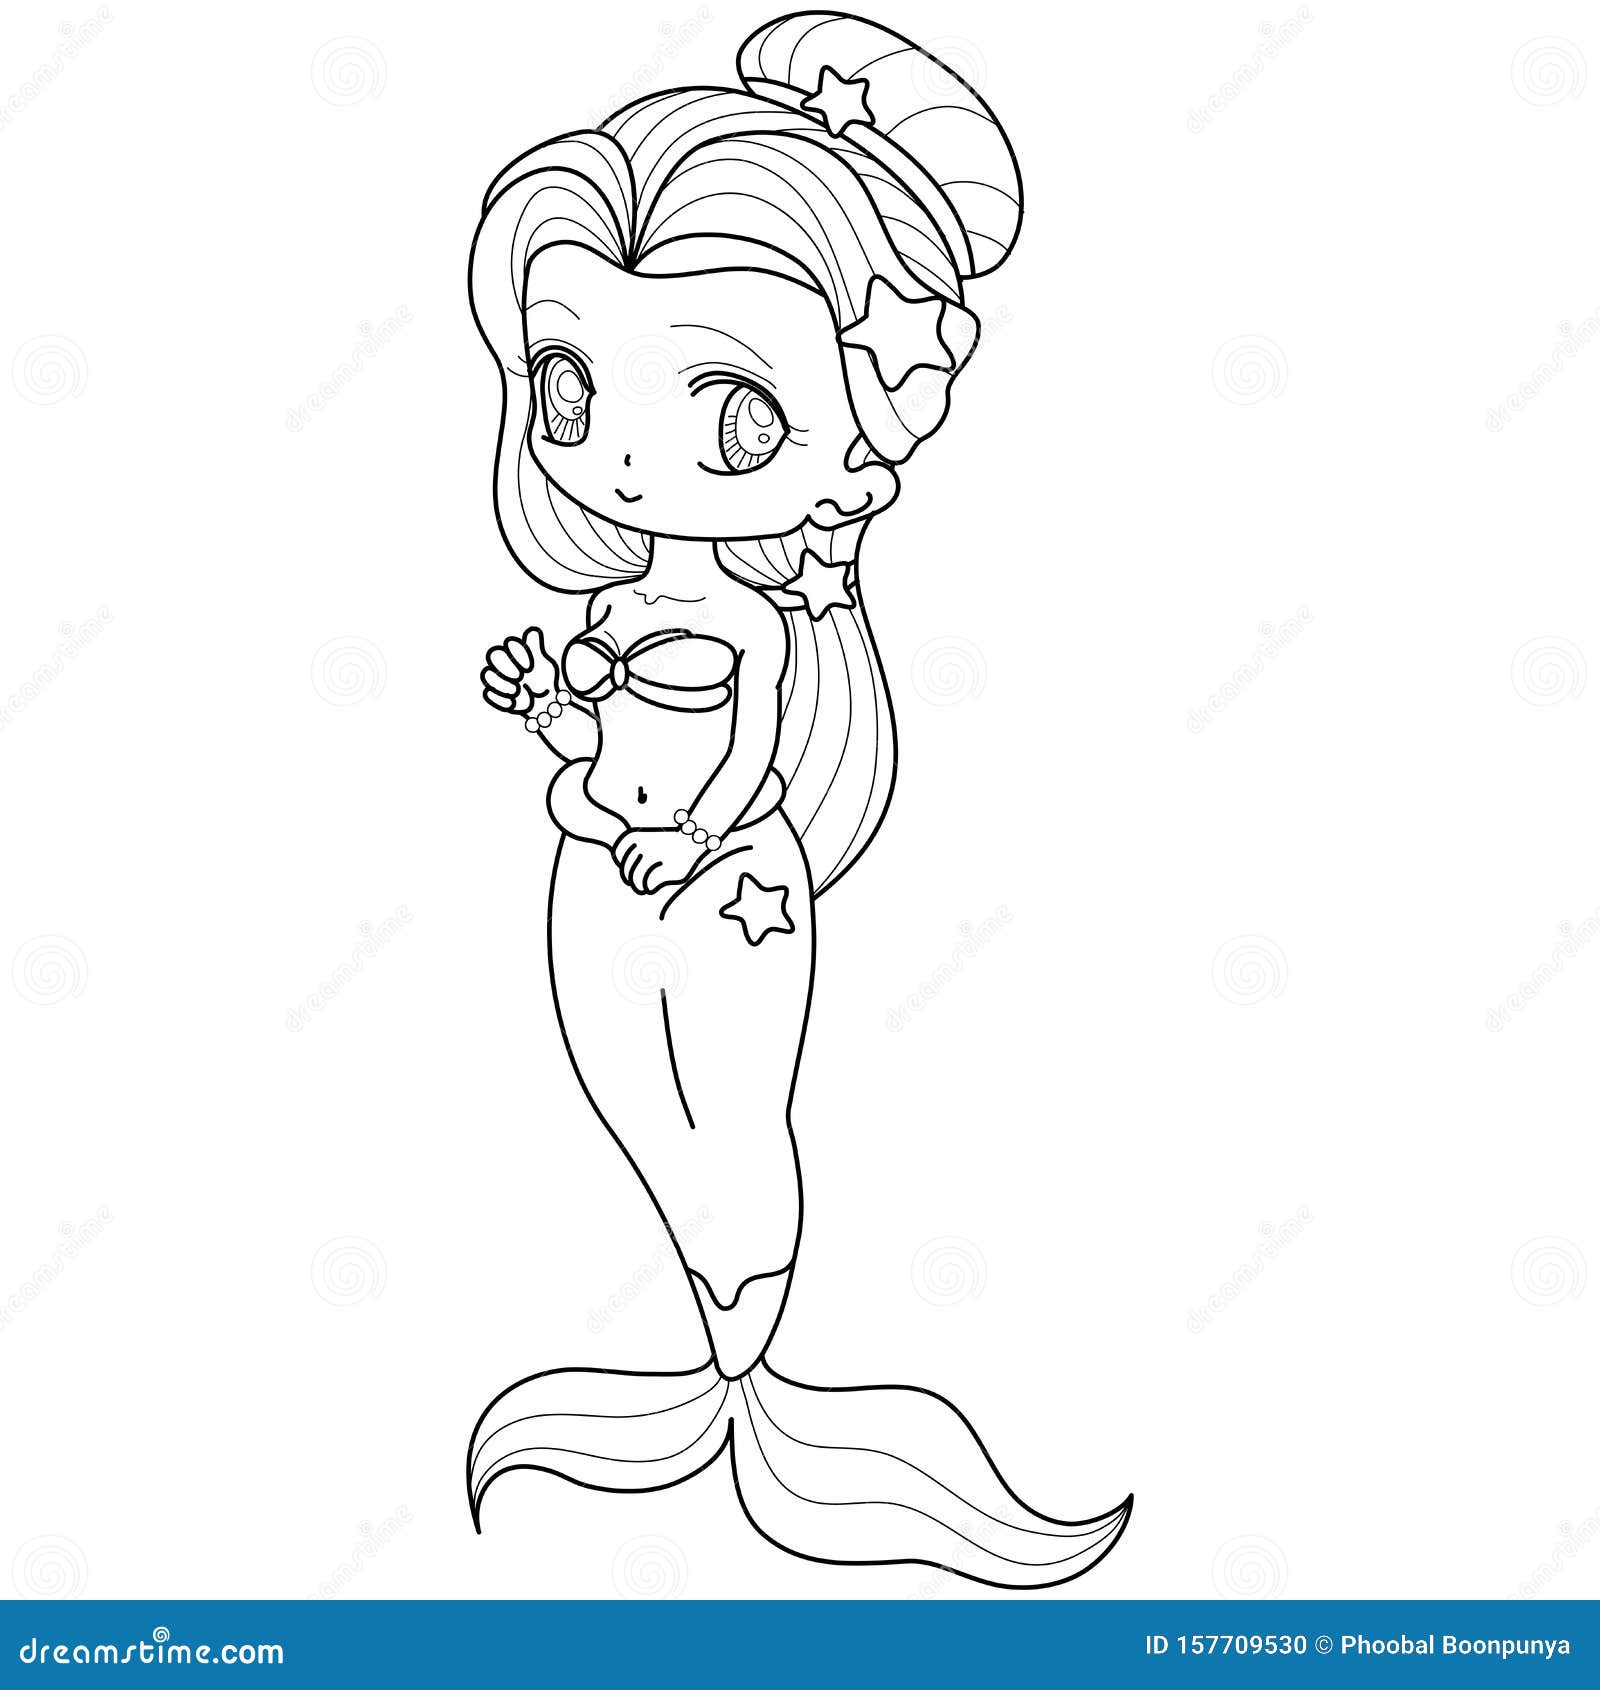 30 Stunning Mermaid Coloring Pages